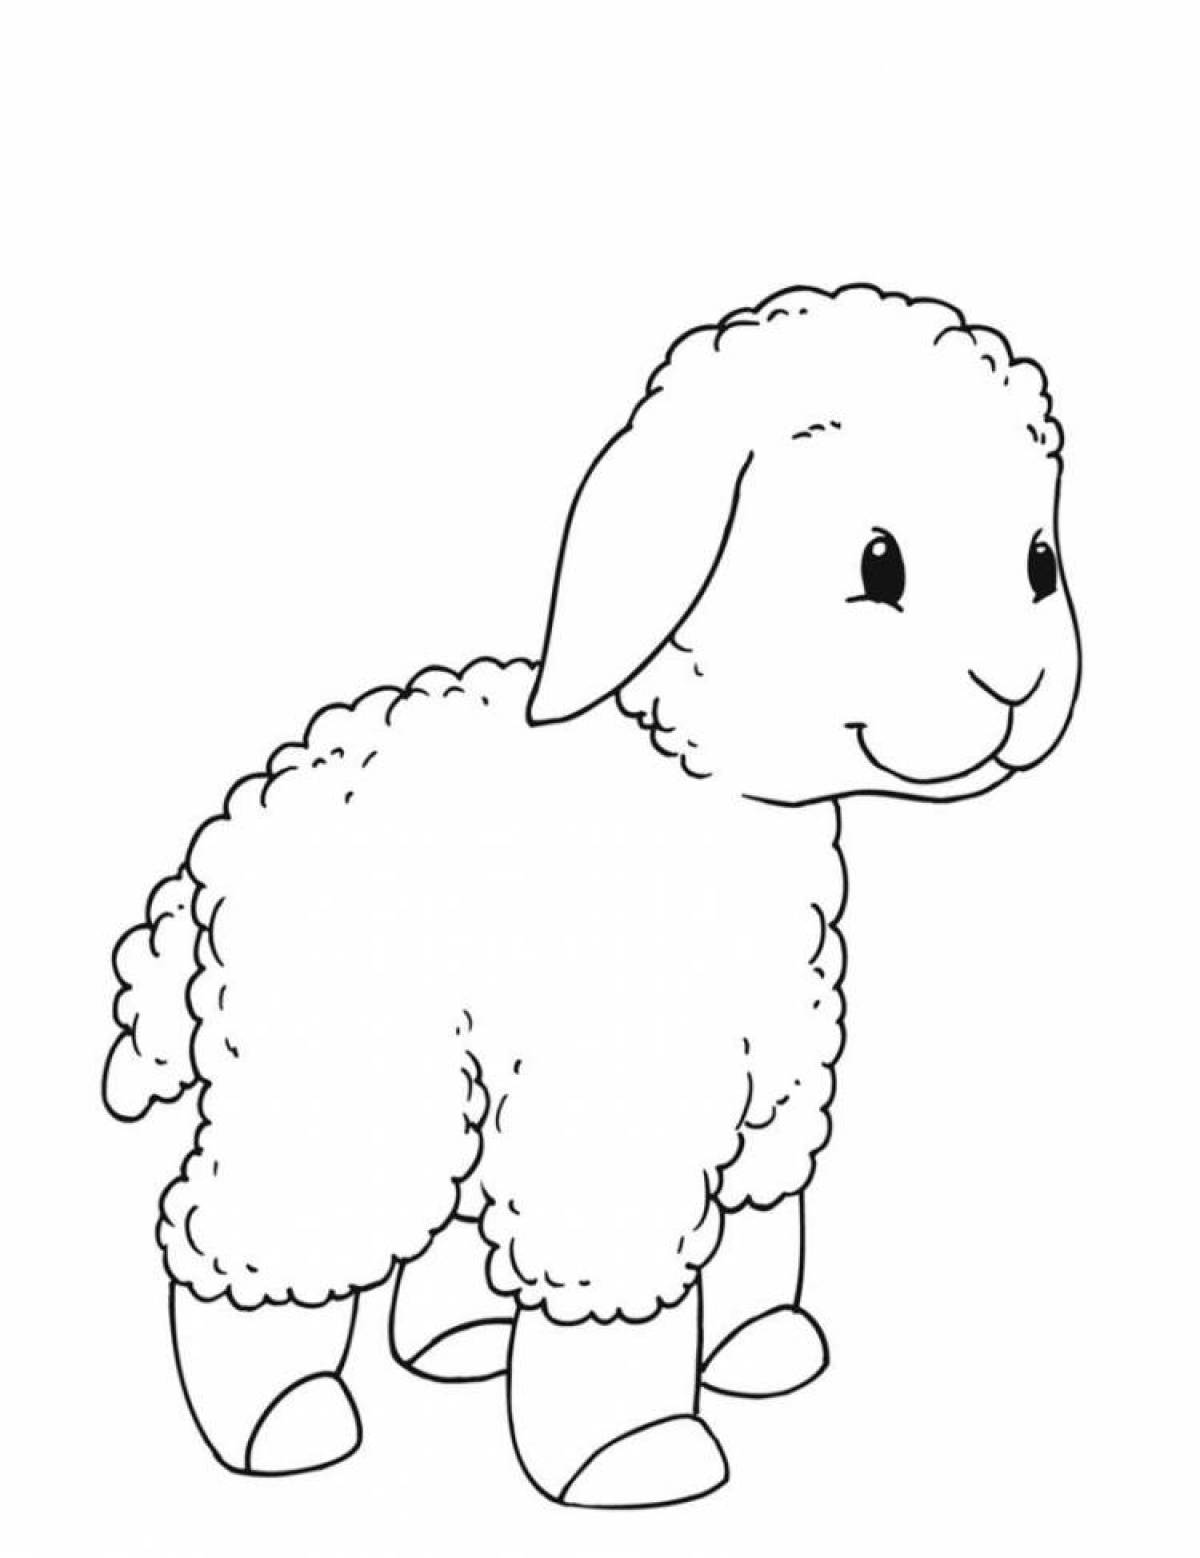 Sunshine sheep coloring book for kids